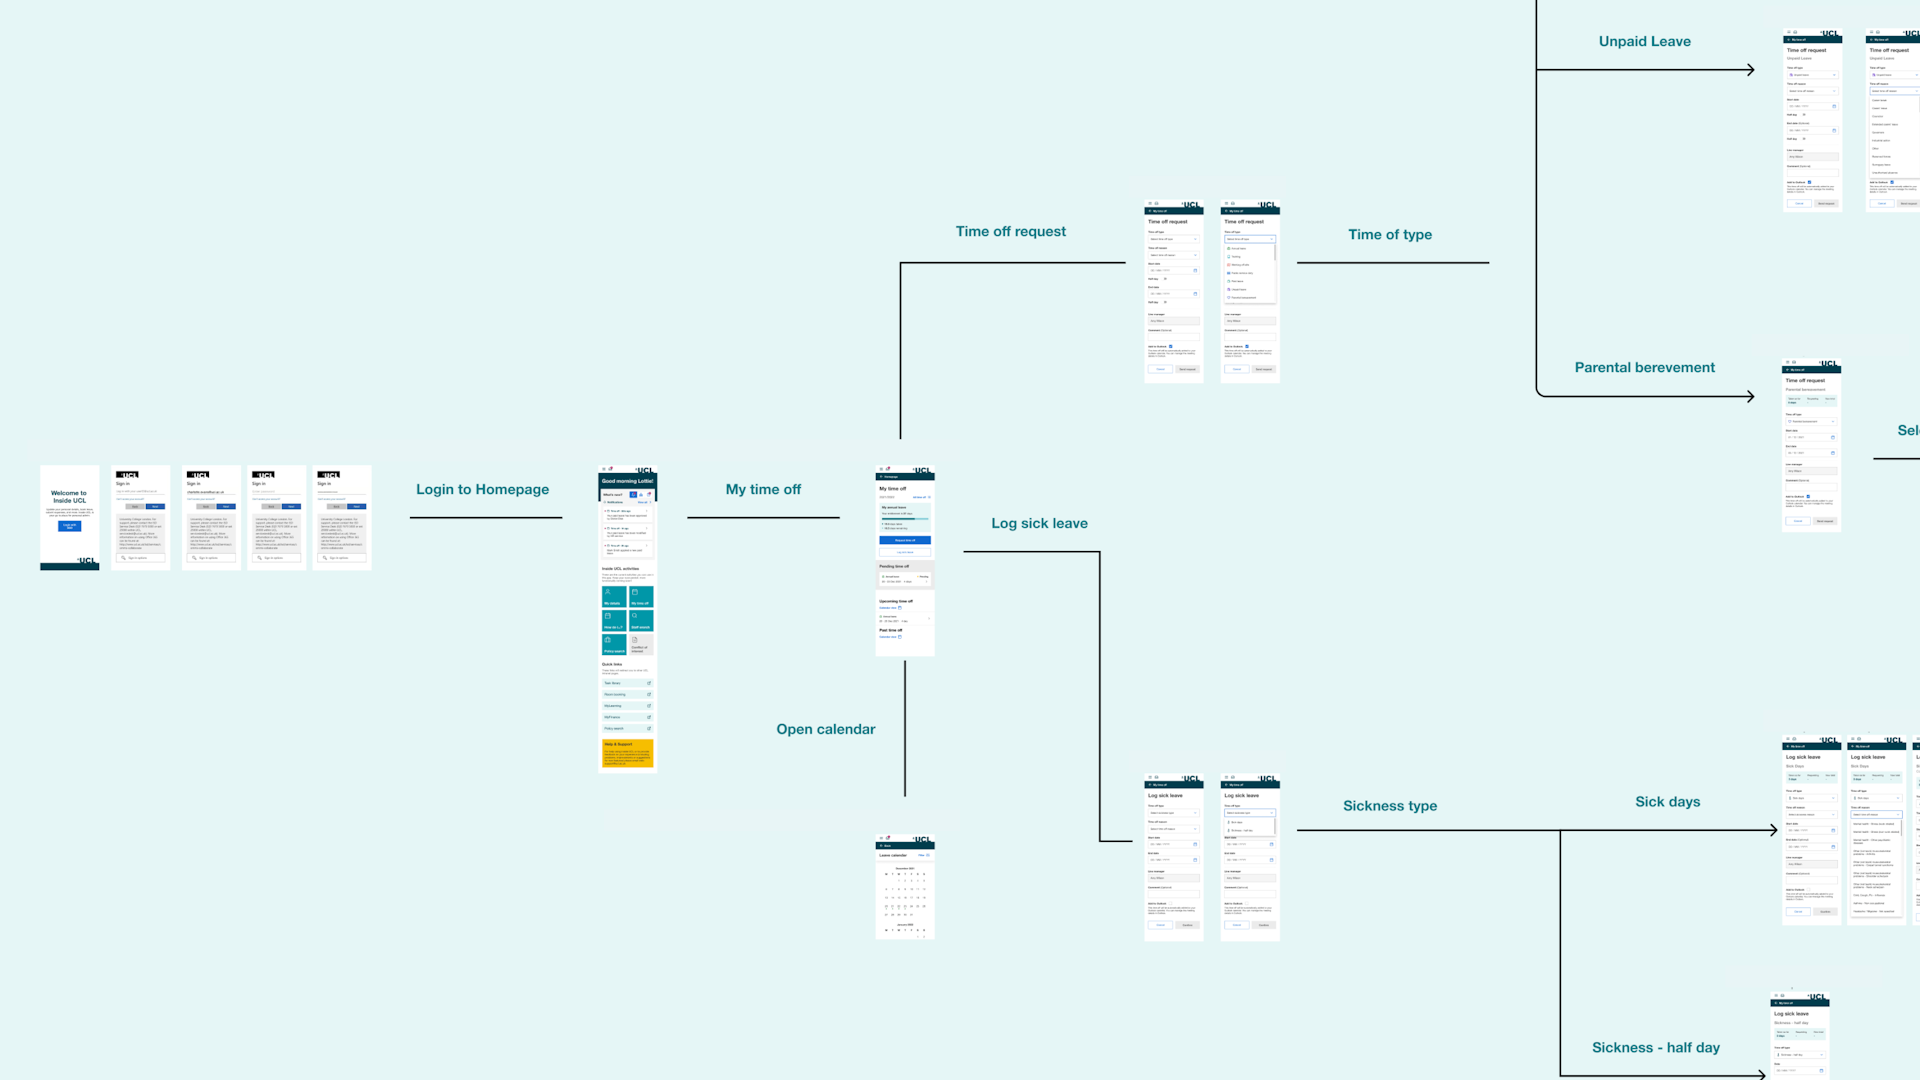 Overview of the Figma prototype flows for UCL employee experience platform